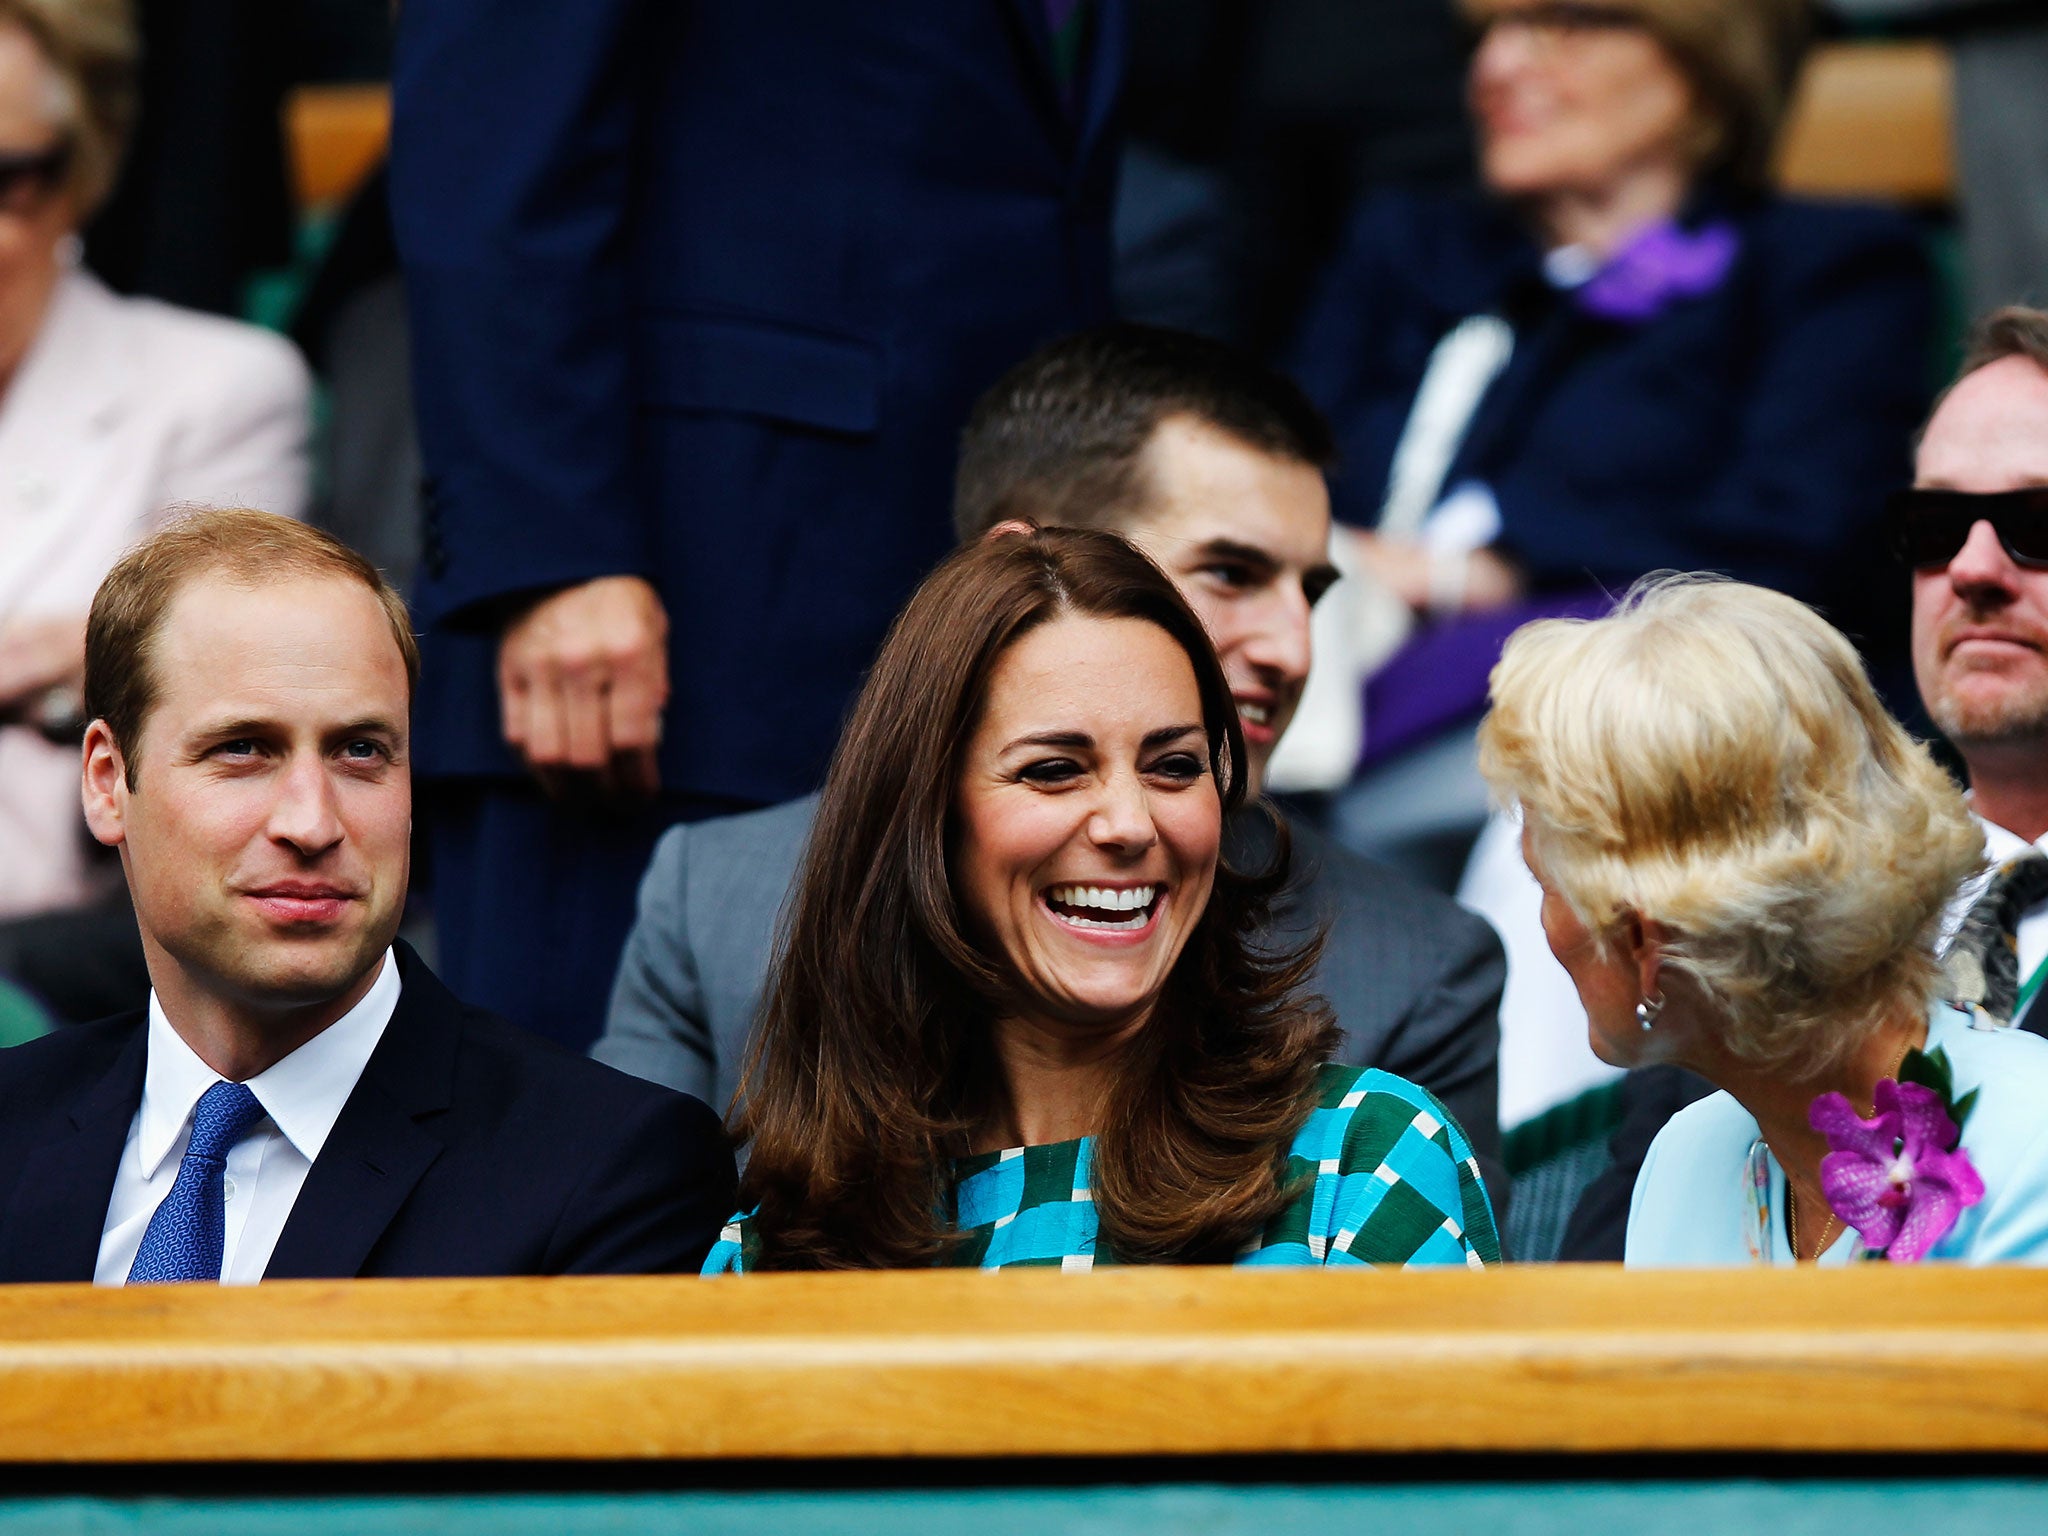 The Duke and Duchess of Cambridge watch the final